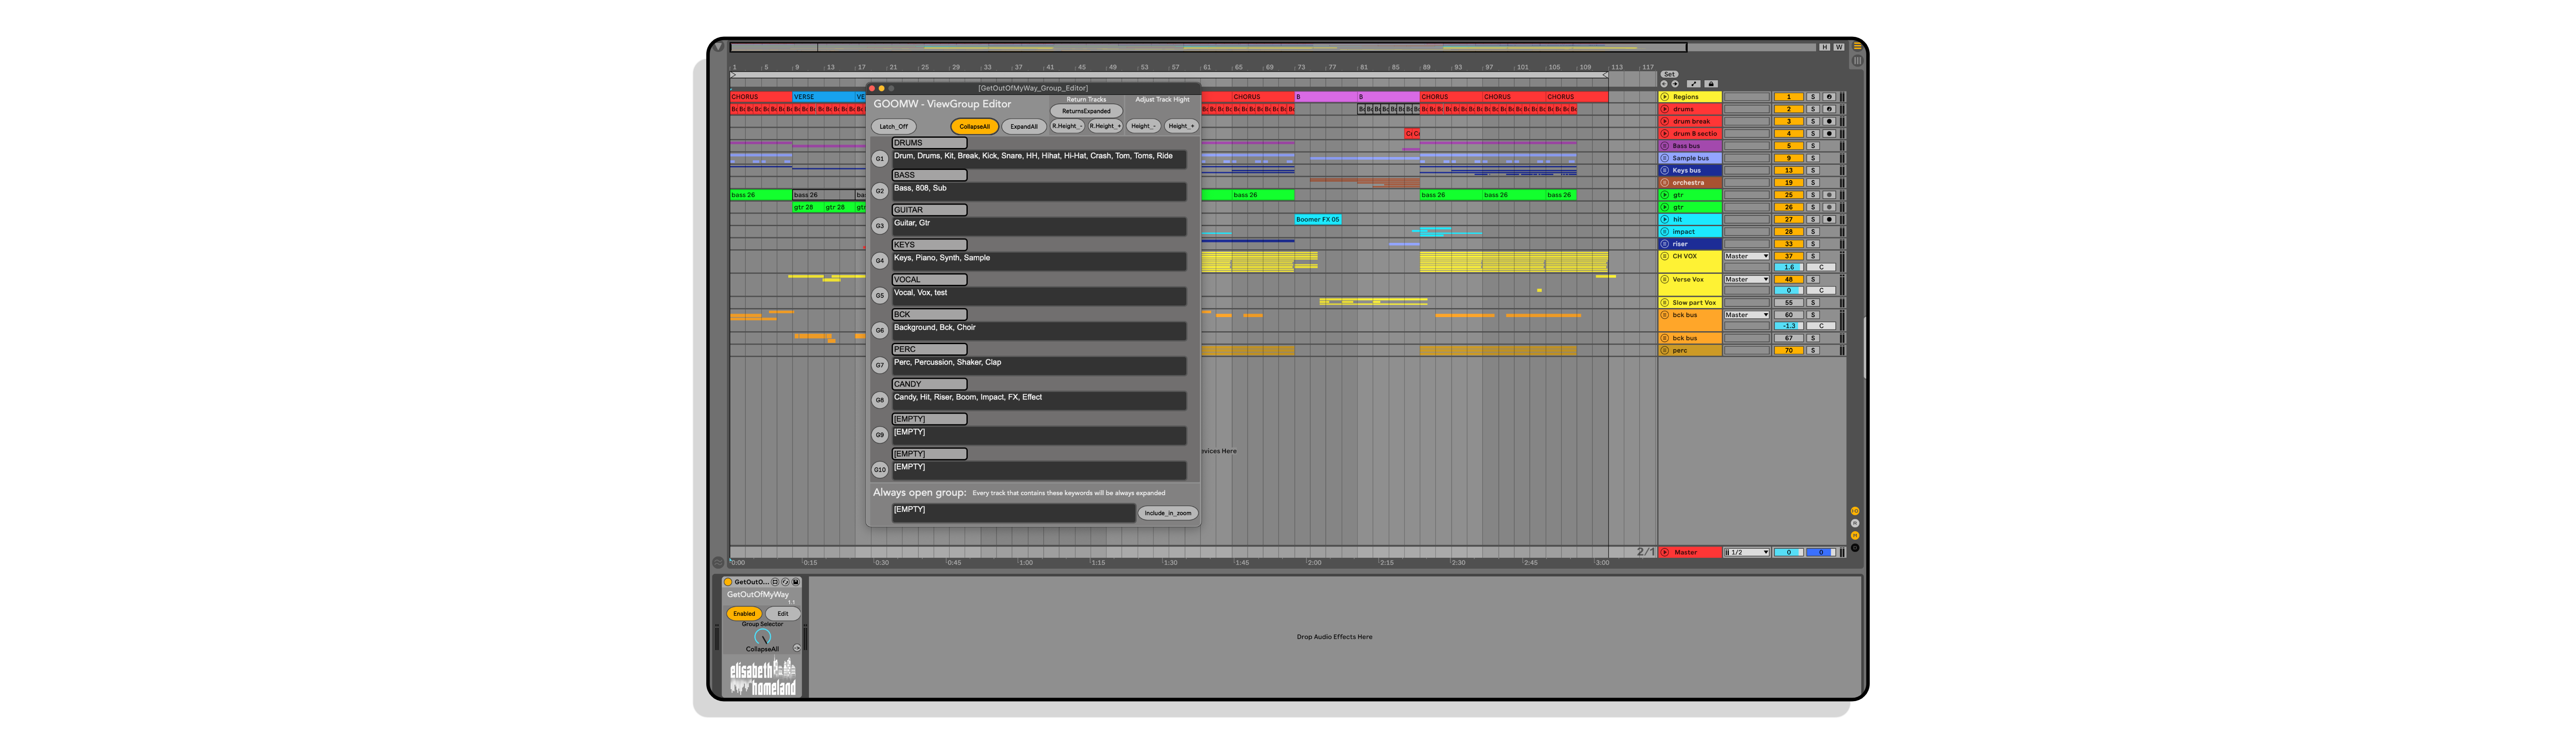 Get Out of my Way MaxforLive Device for Ableton Live by Elisabeth Homeland